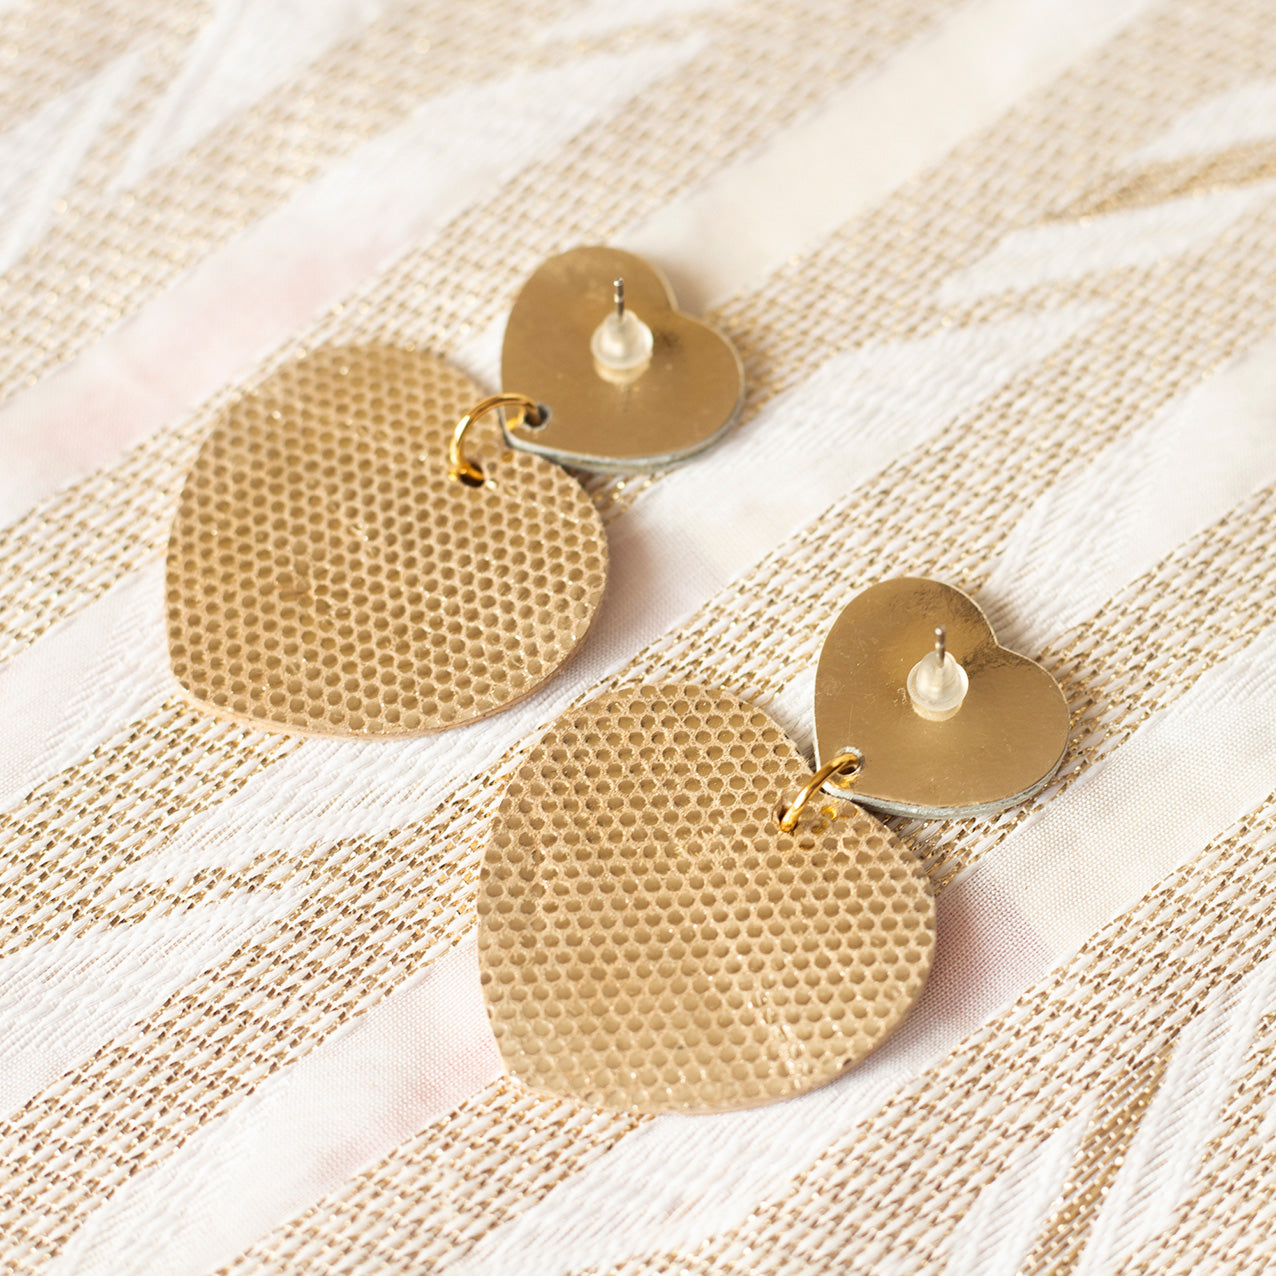 Double Hearts earrings in gold leather and platinum